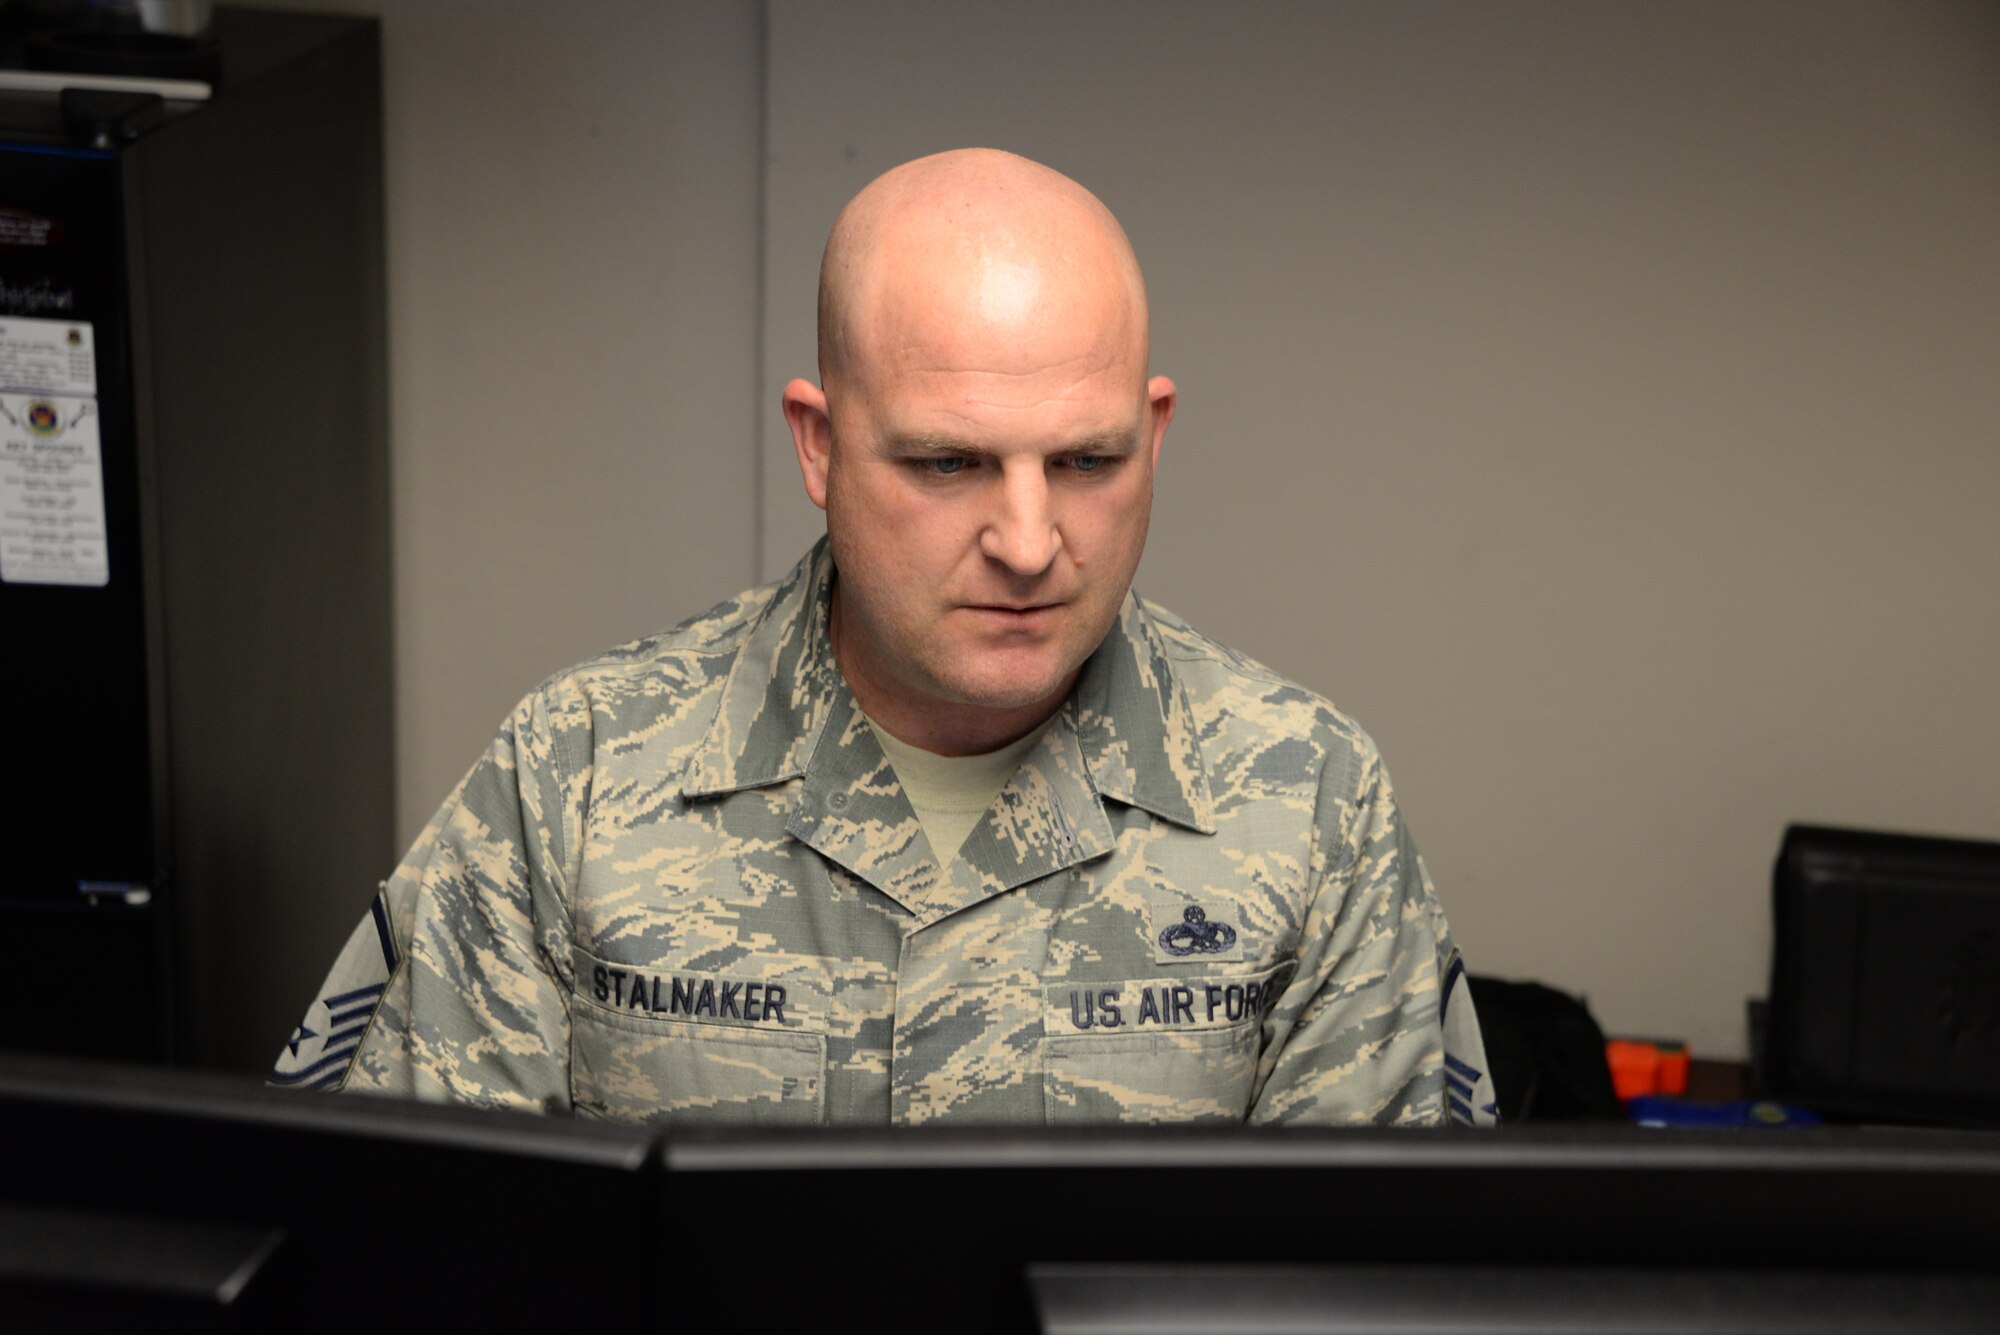 Master Sgt. James Stalnaker, 60th Maintenance Squadron, works at his desk at Travis Air Force Base, Calif., March 20, 2017. Stalnaker suffered a traumatic brain injury, broken ribs and several other injuries in a motorcycle crash in October 2015. He is now a master resiliency training instructor and shares his personal resilience story with Travis Airmen. (U.S. Air Force photo/Tech. Sgt. James Hodgman/Released)